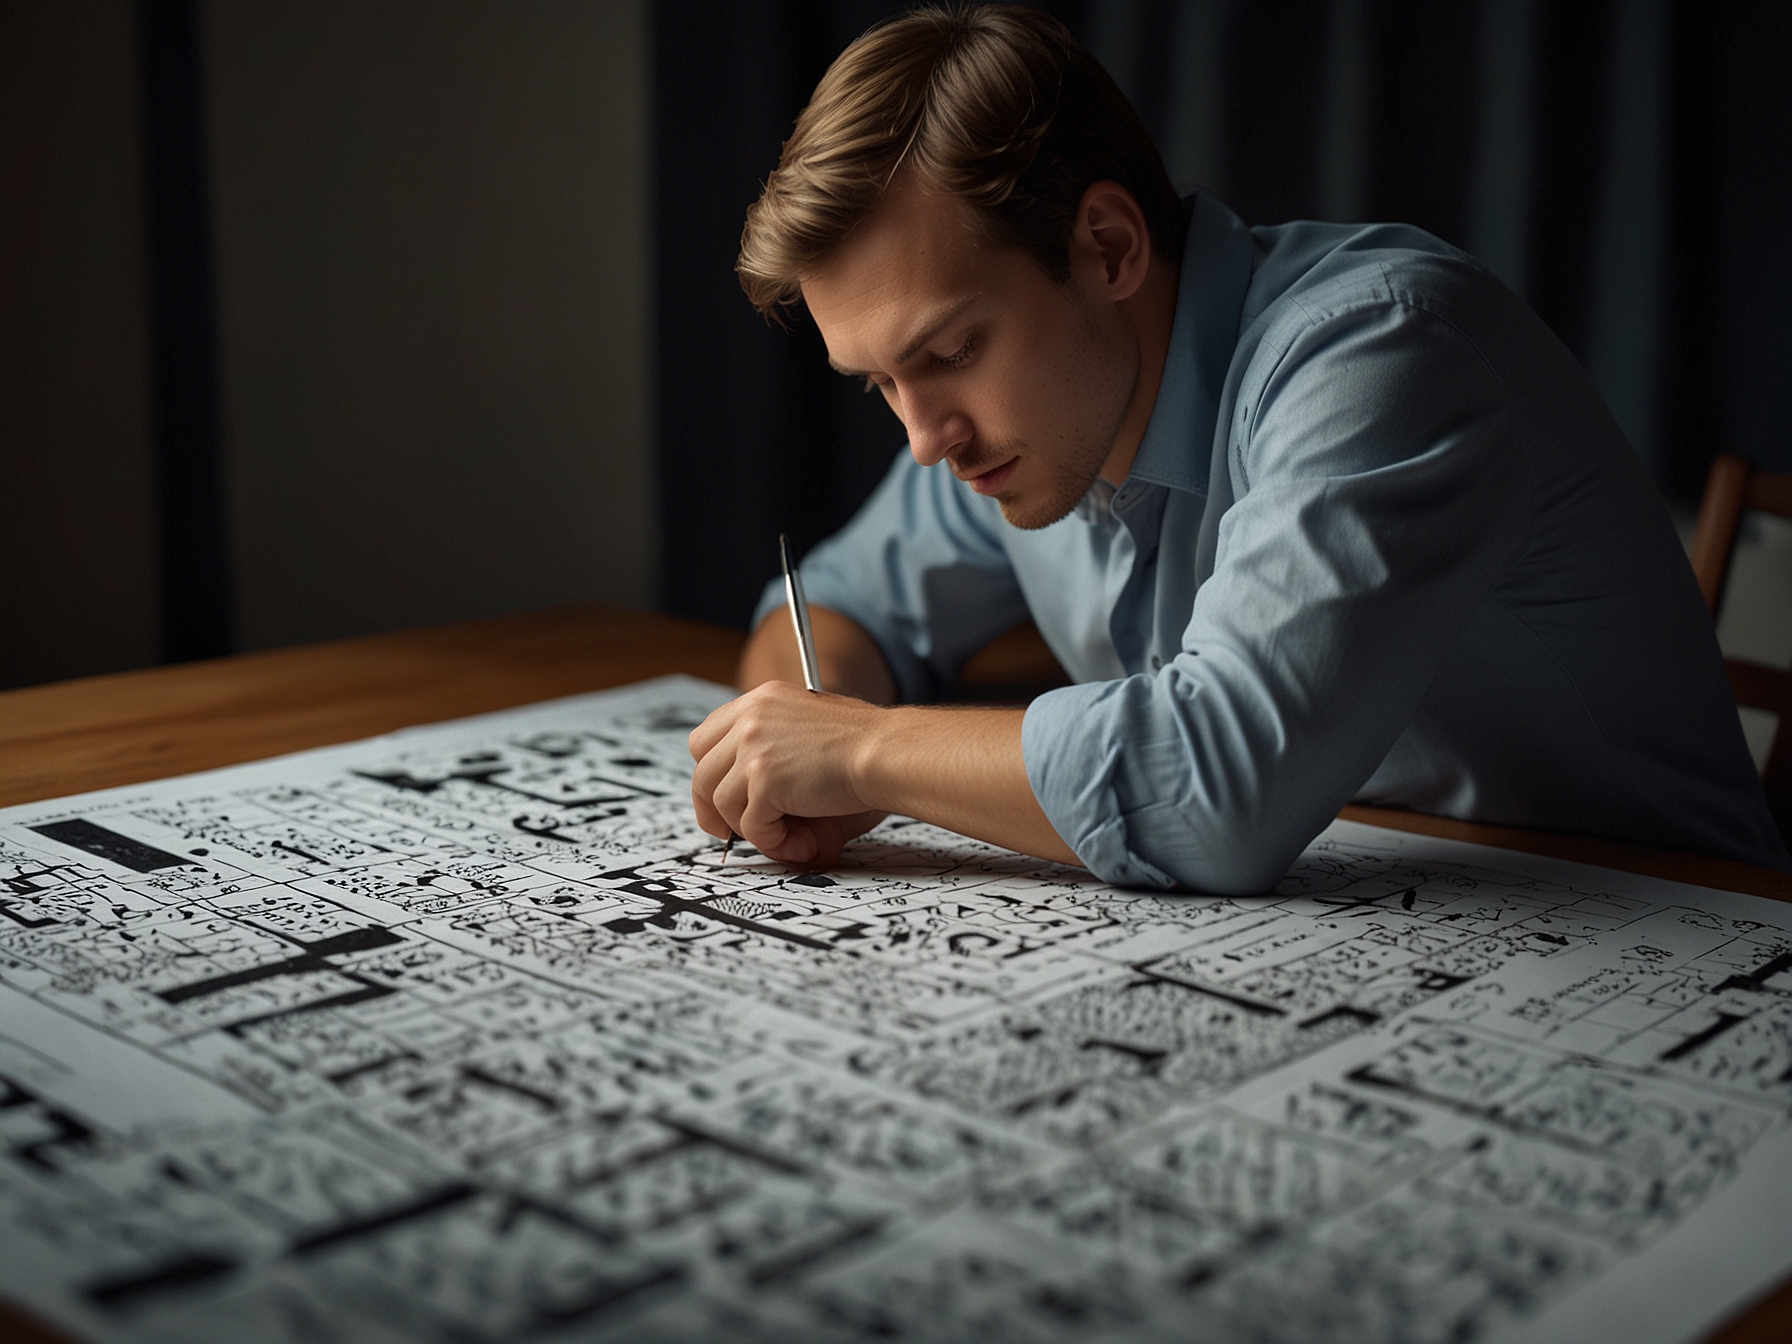 A player is deeply focused on solving the NYT Mini Crossword puzzle with a pen, surrounded by hints and words partially filled in the compact crossword grid.